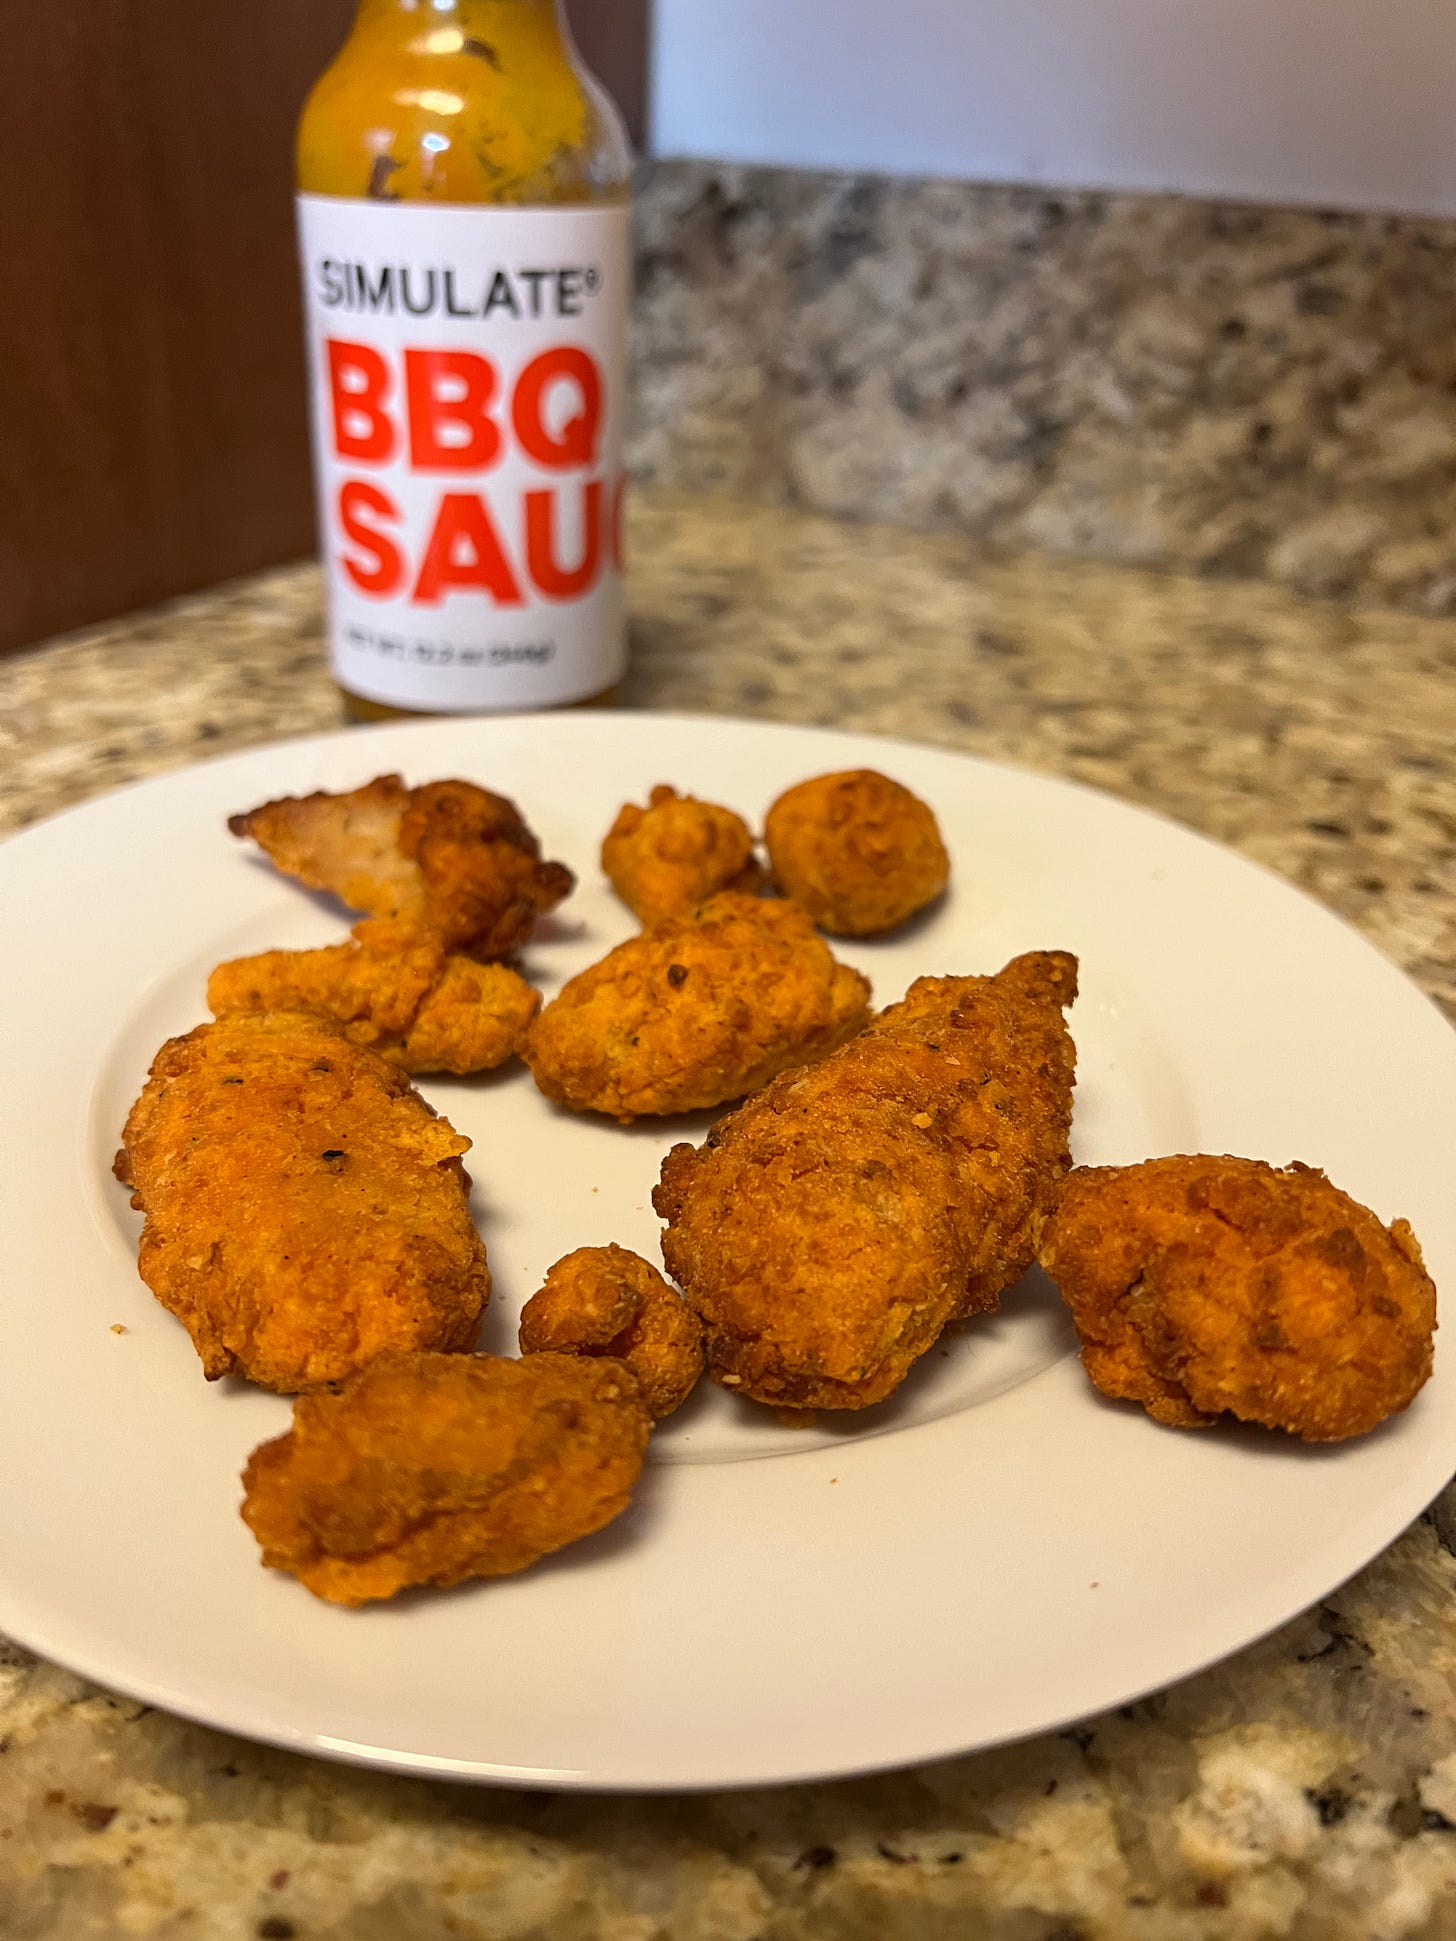 A plate of various nugget-like chicken wings, with a bottle of BBQ sauce behind them.